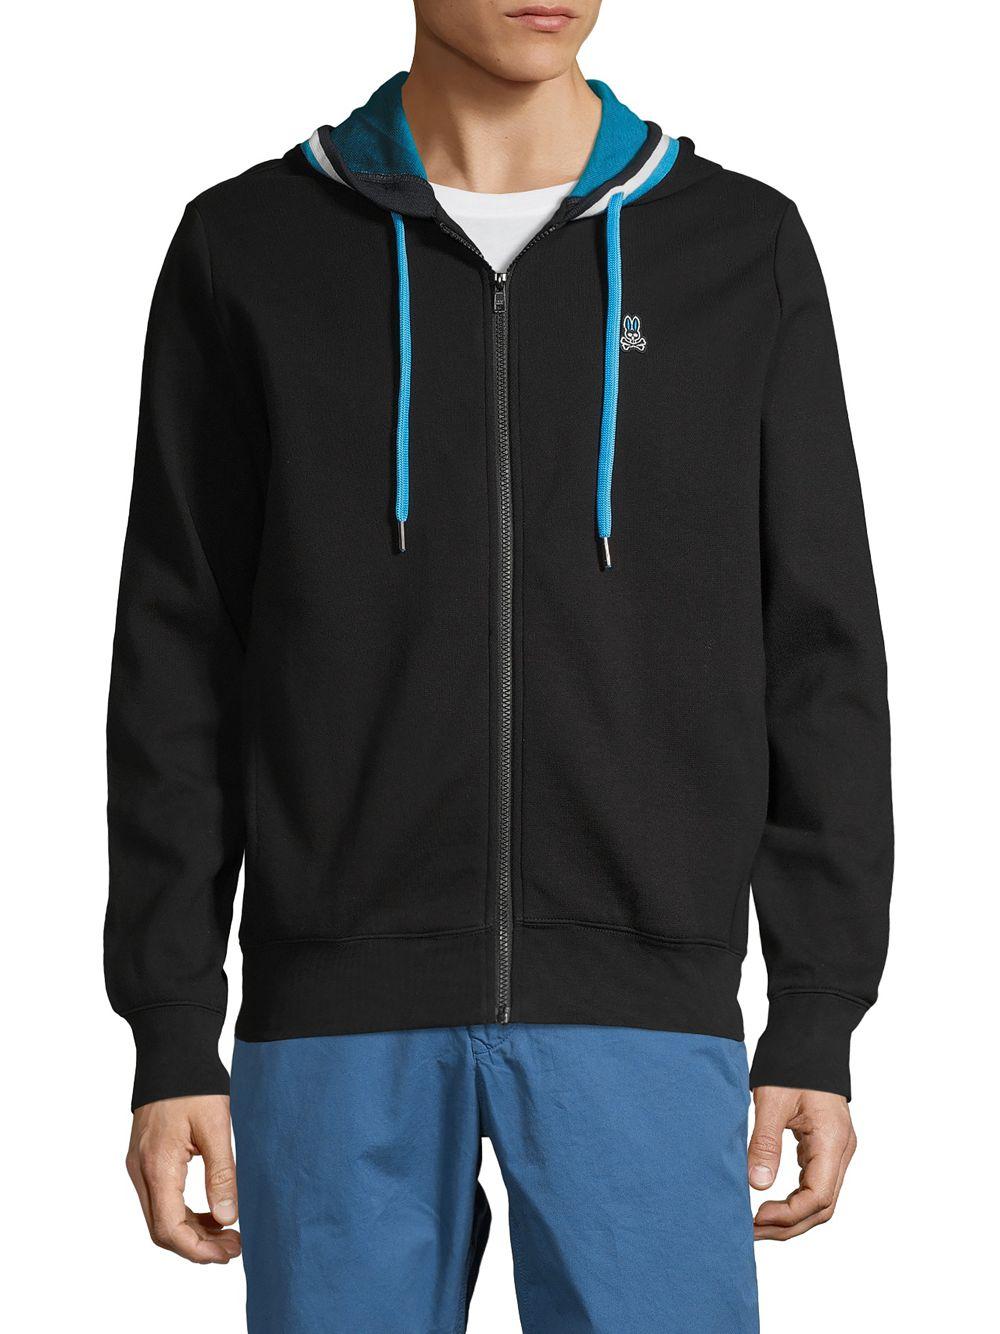 Psycho Bunny Cotton Holcombe Knit Hoodie in Black for Men - Lyst